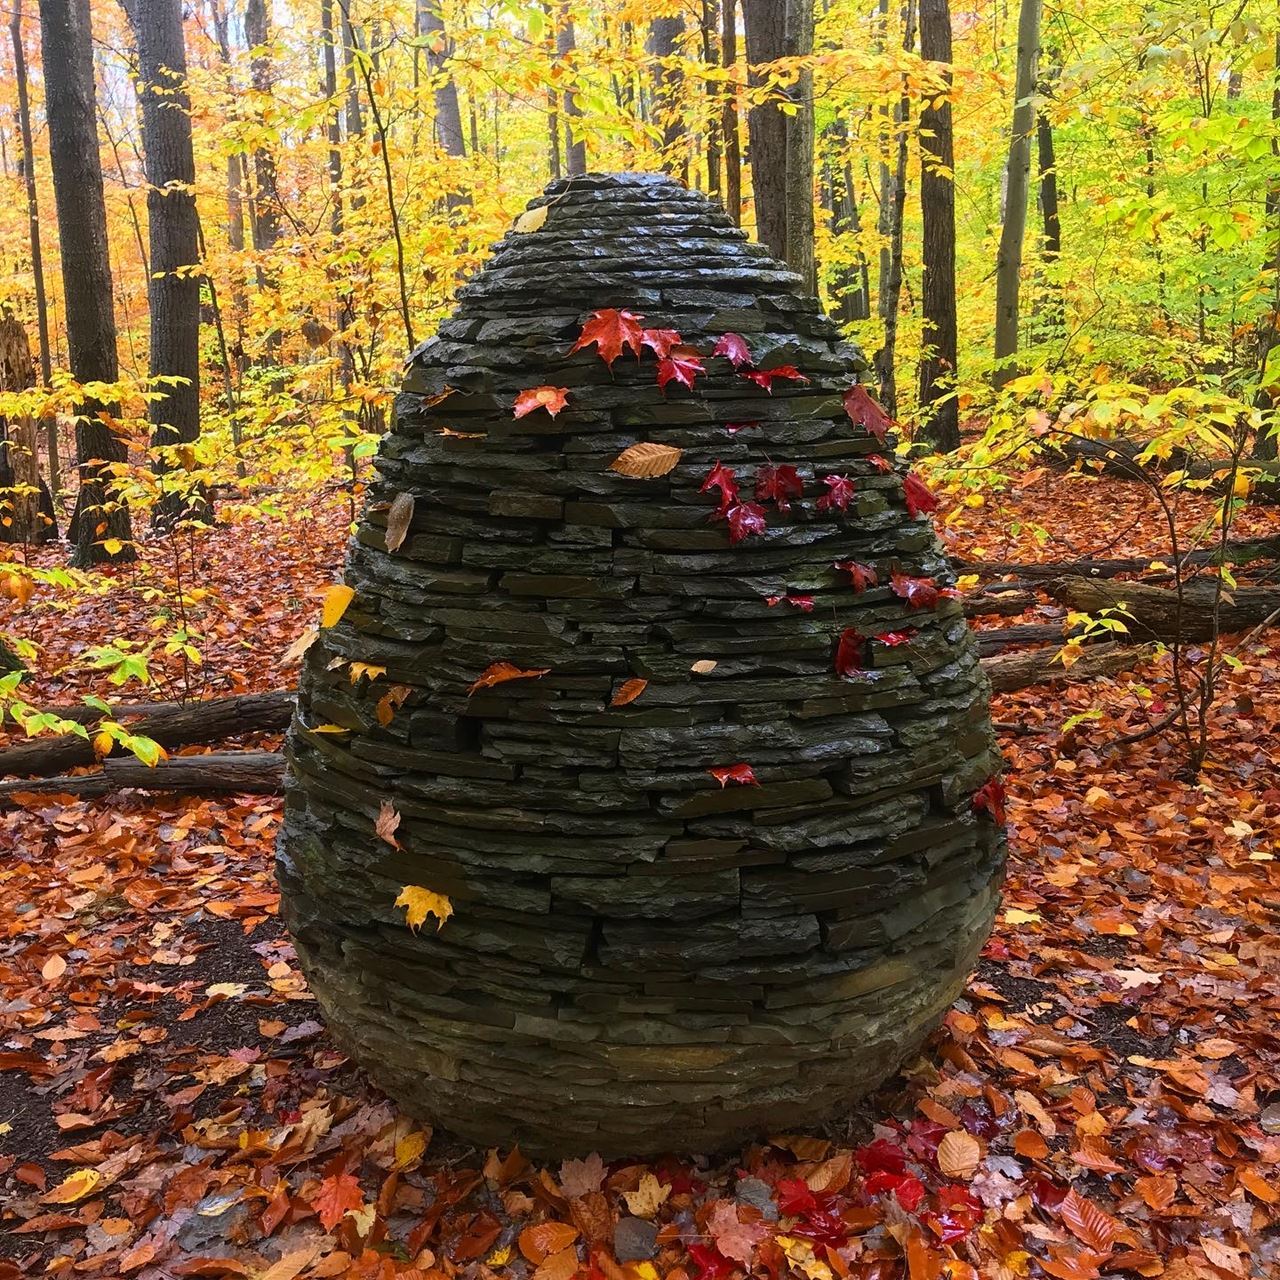 "Sapsucker Cairn" by world famous artist Andy Goldsworthy, a former A.D. White Professor at Large for Cornell University. This sculpture is located in Sapsucker Woods Sanctuary. Image taken in fall of 2020 by Zoë Van Nostrand.  